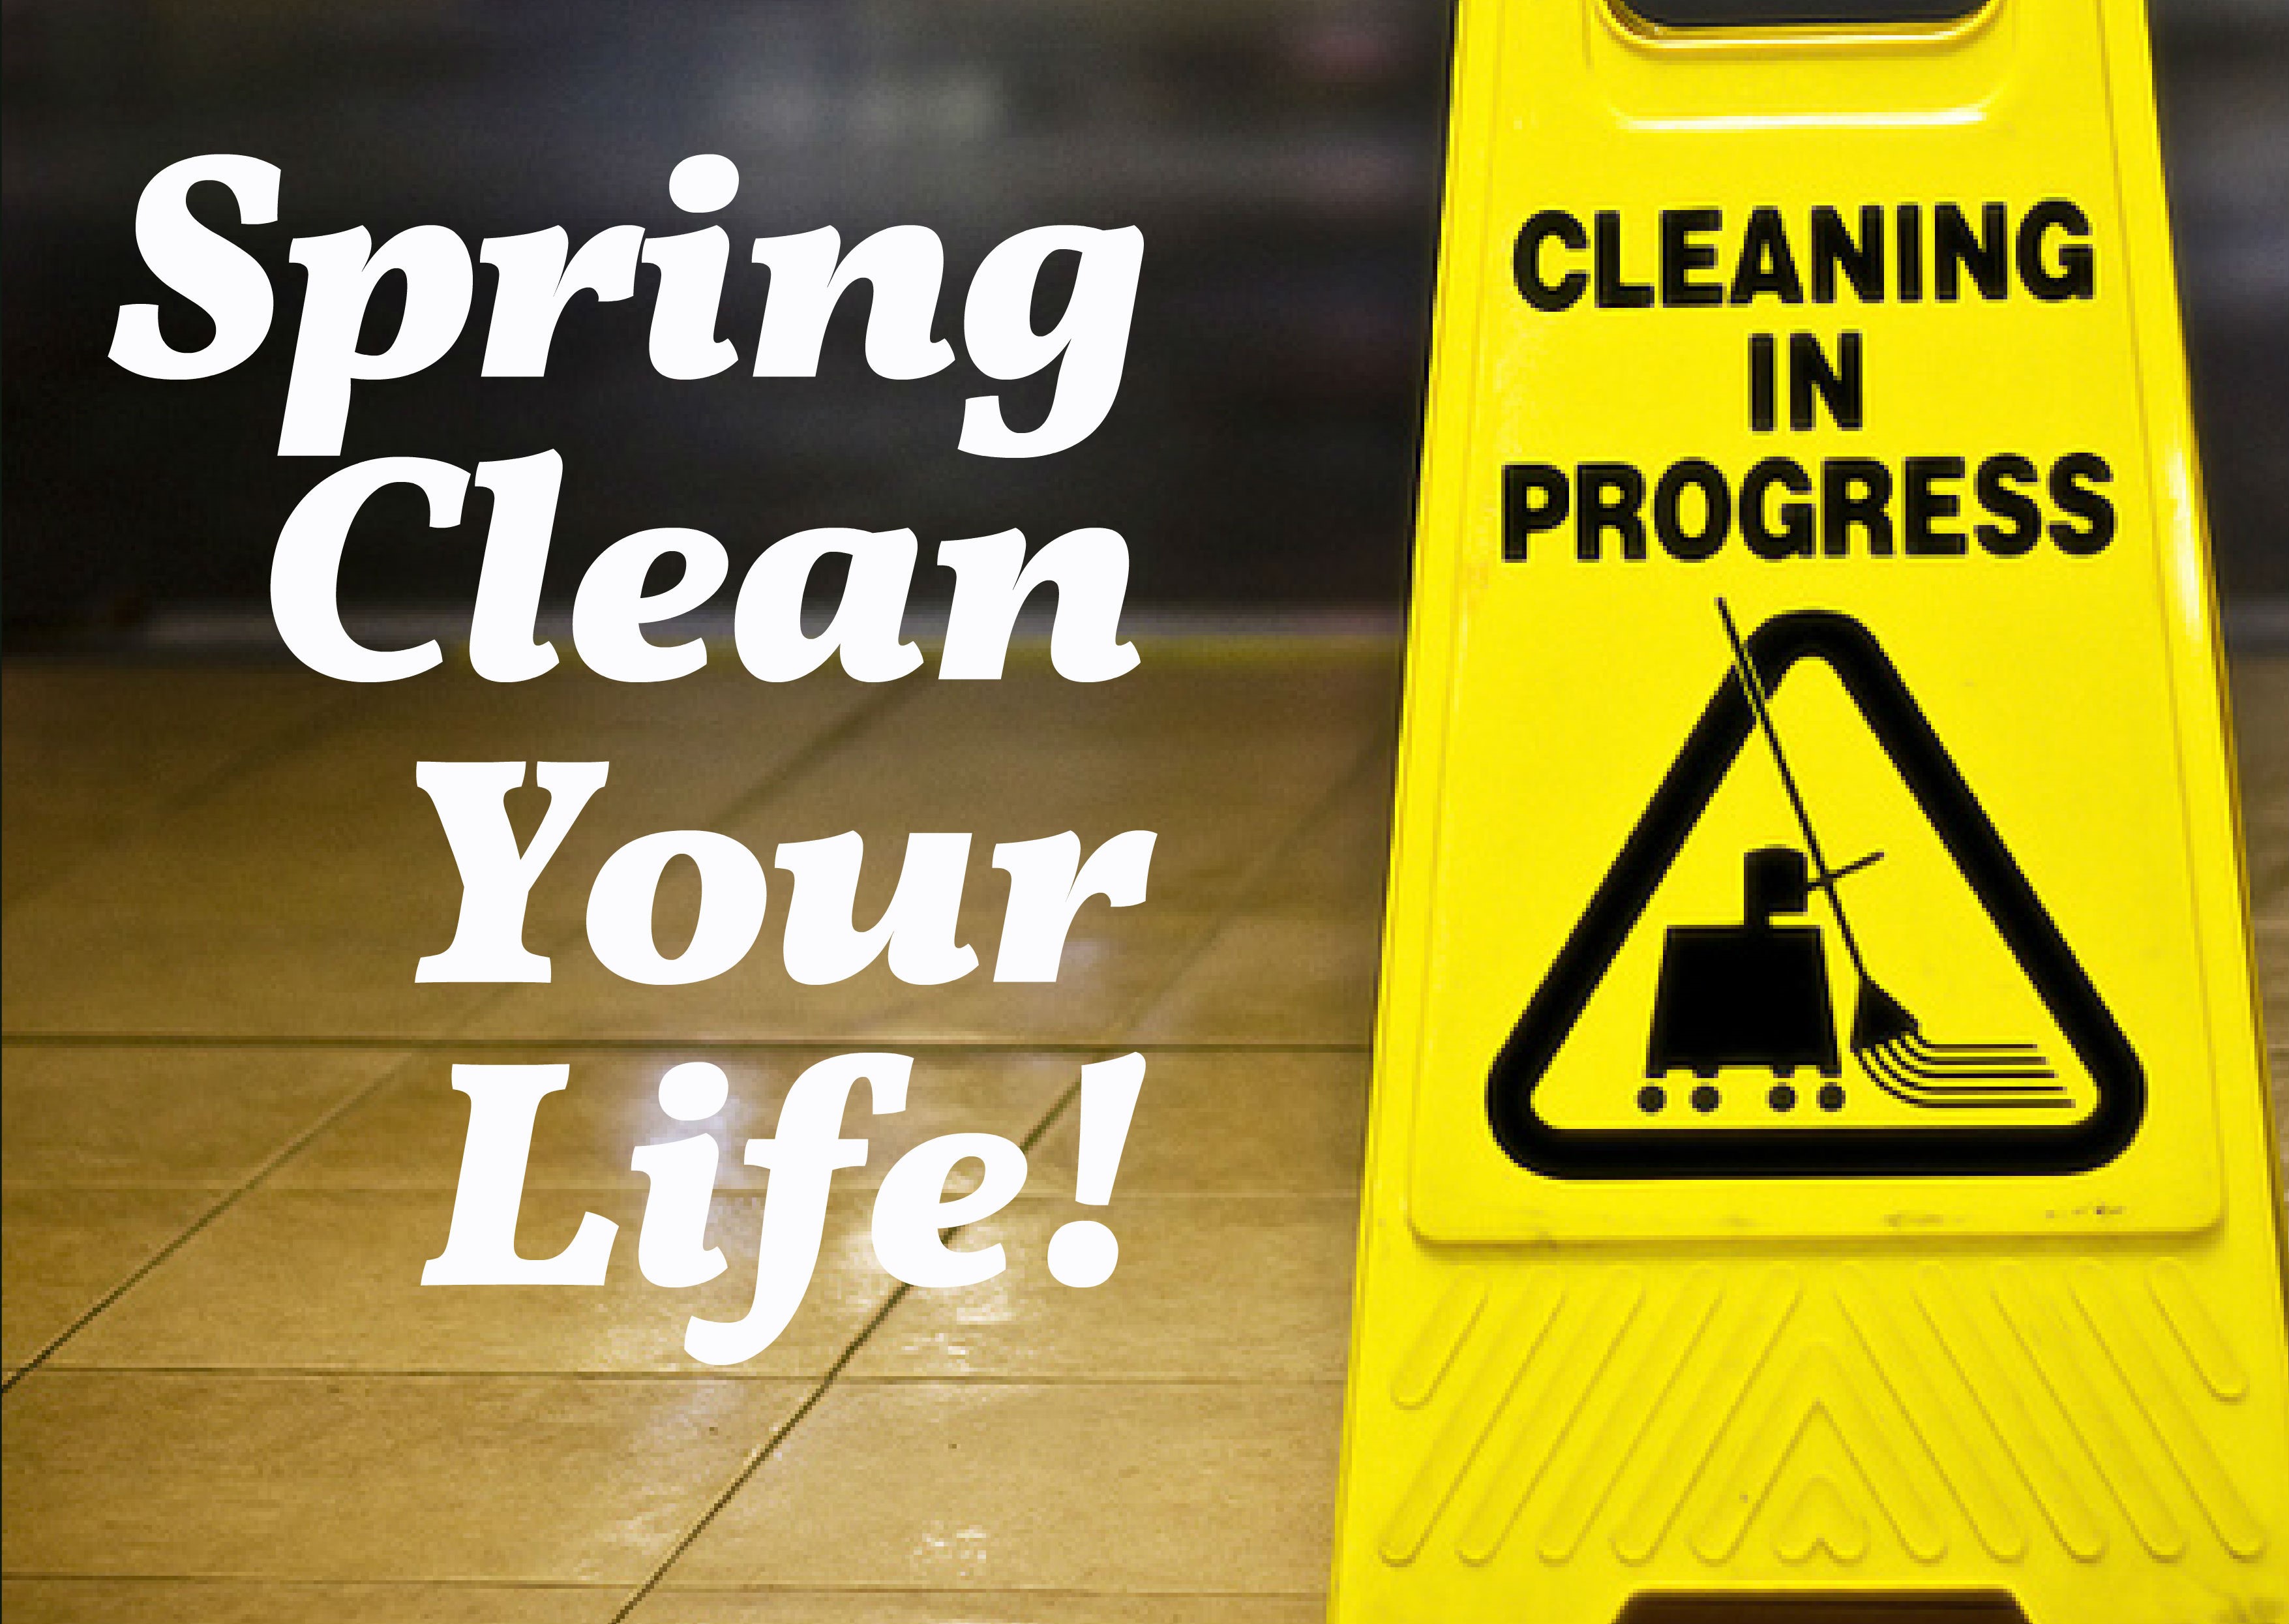 Spring clean your life and get rid of the rubbish